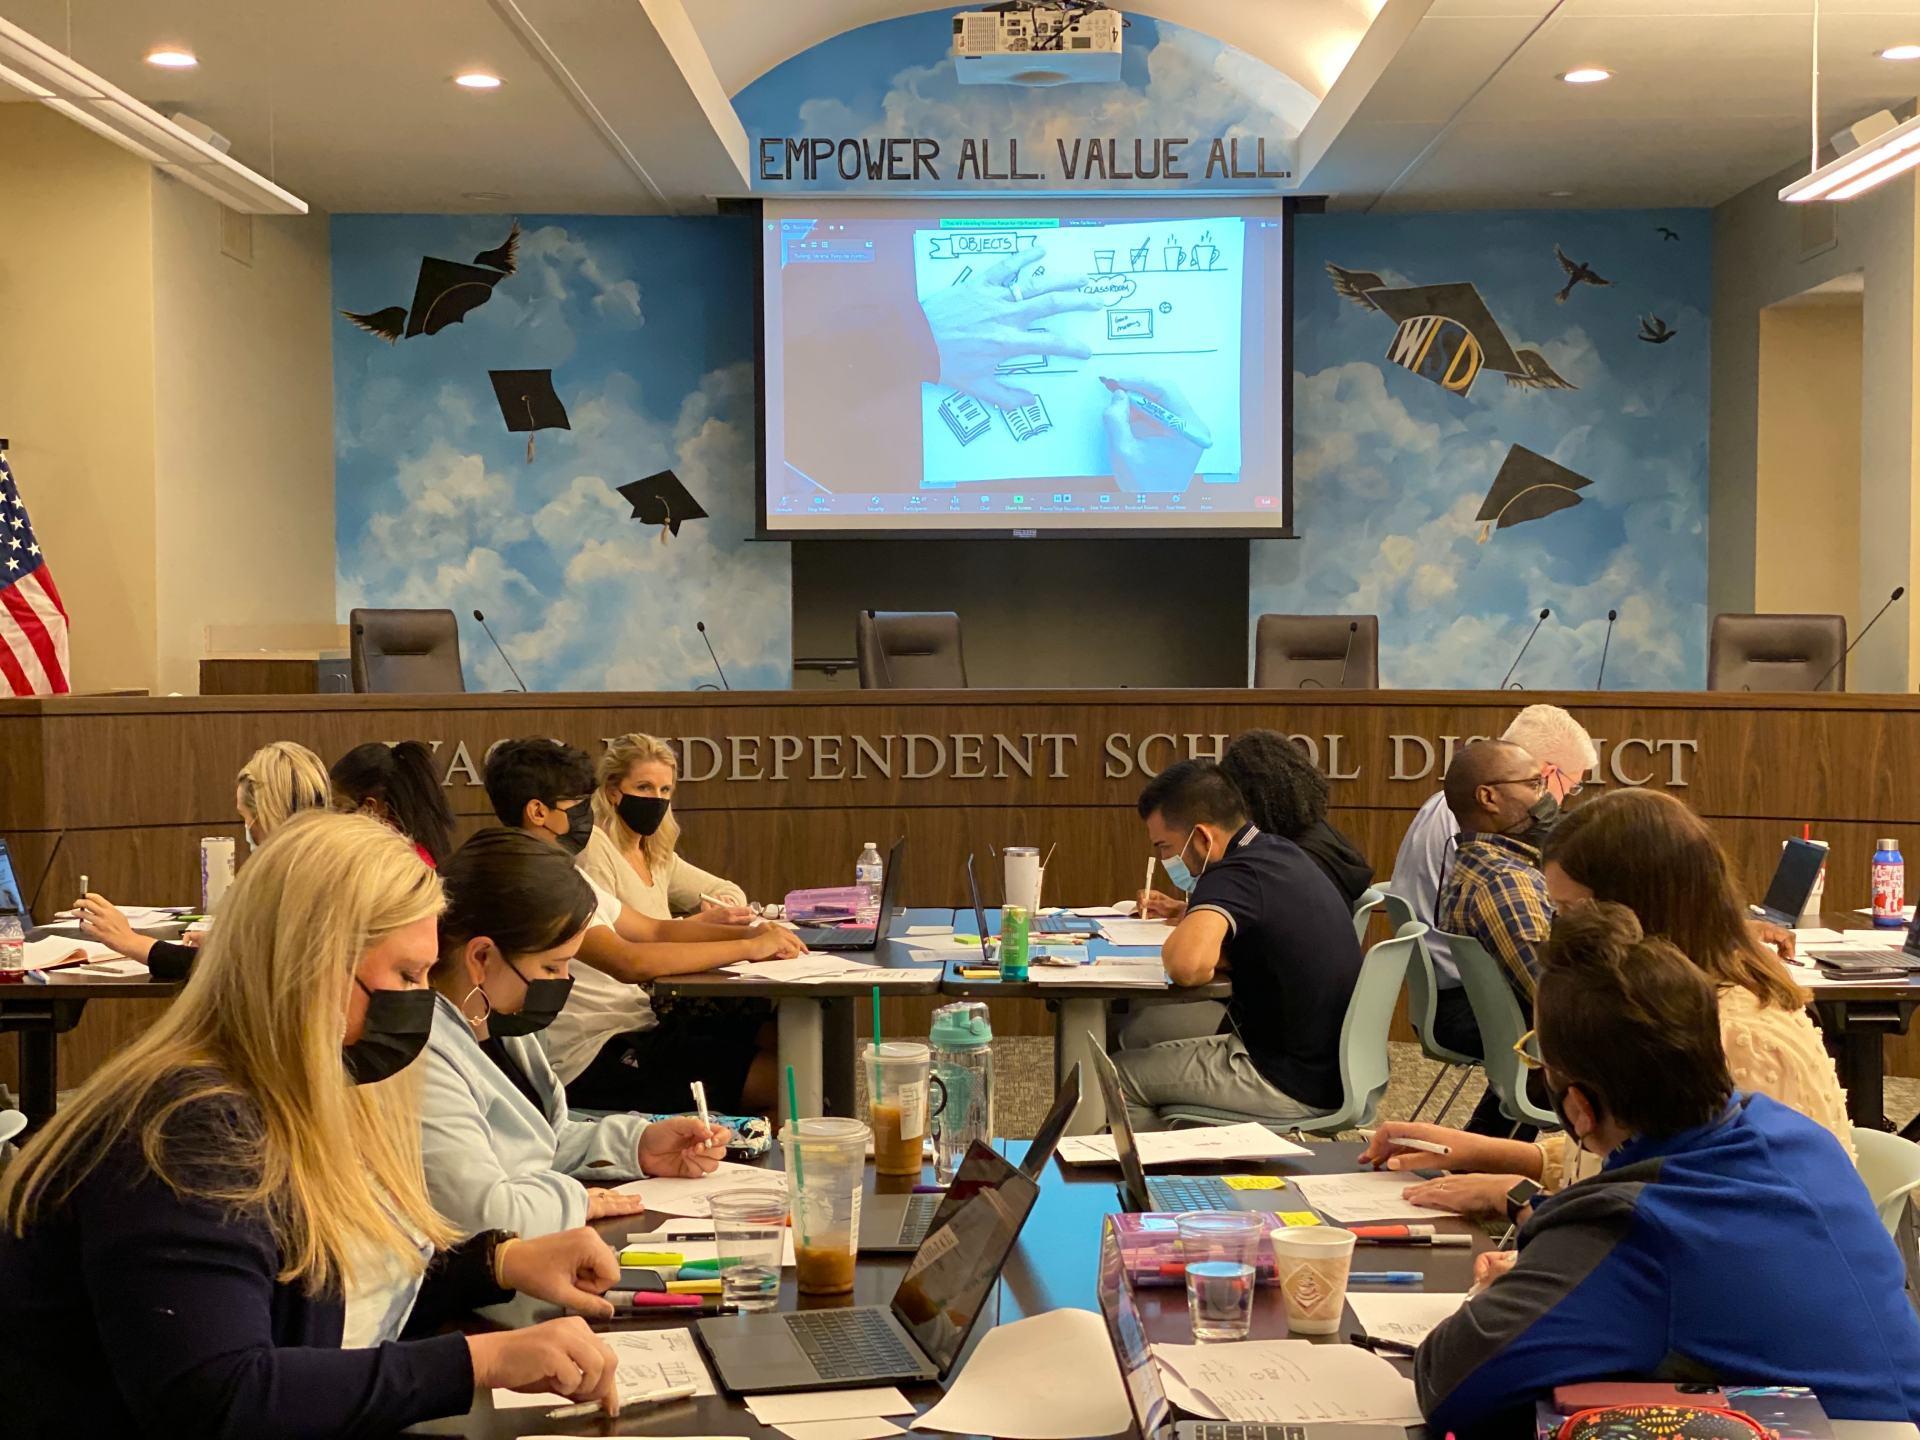 Teachers in Waco ISD participate in a workshop to apply design thinking to improving digital learning in higher education and teacher retention in K-12